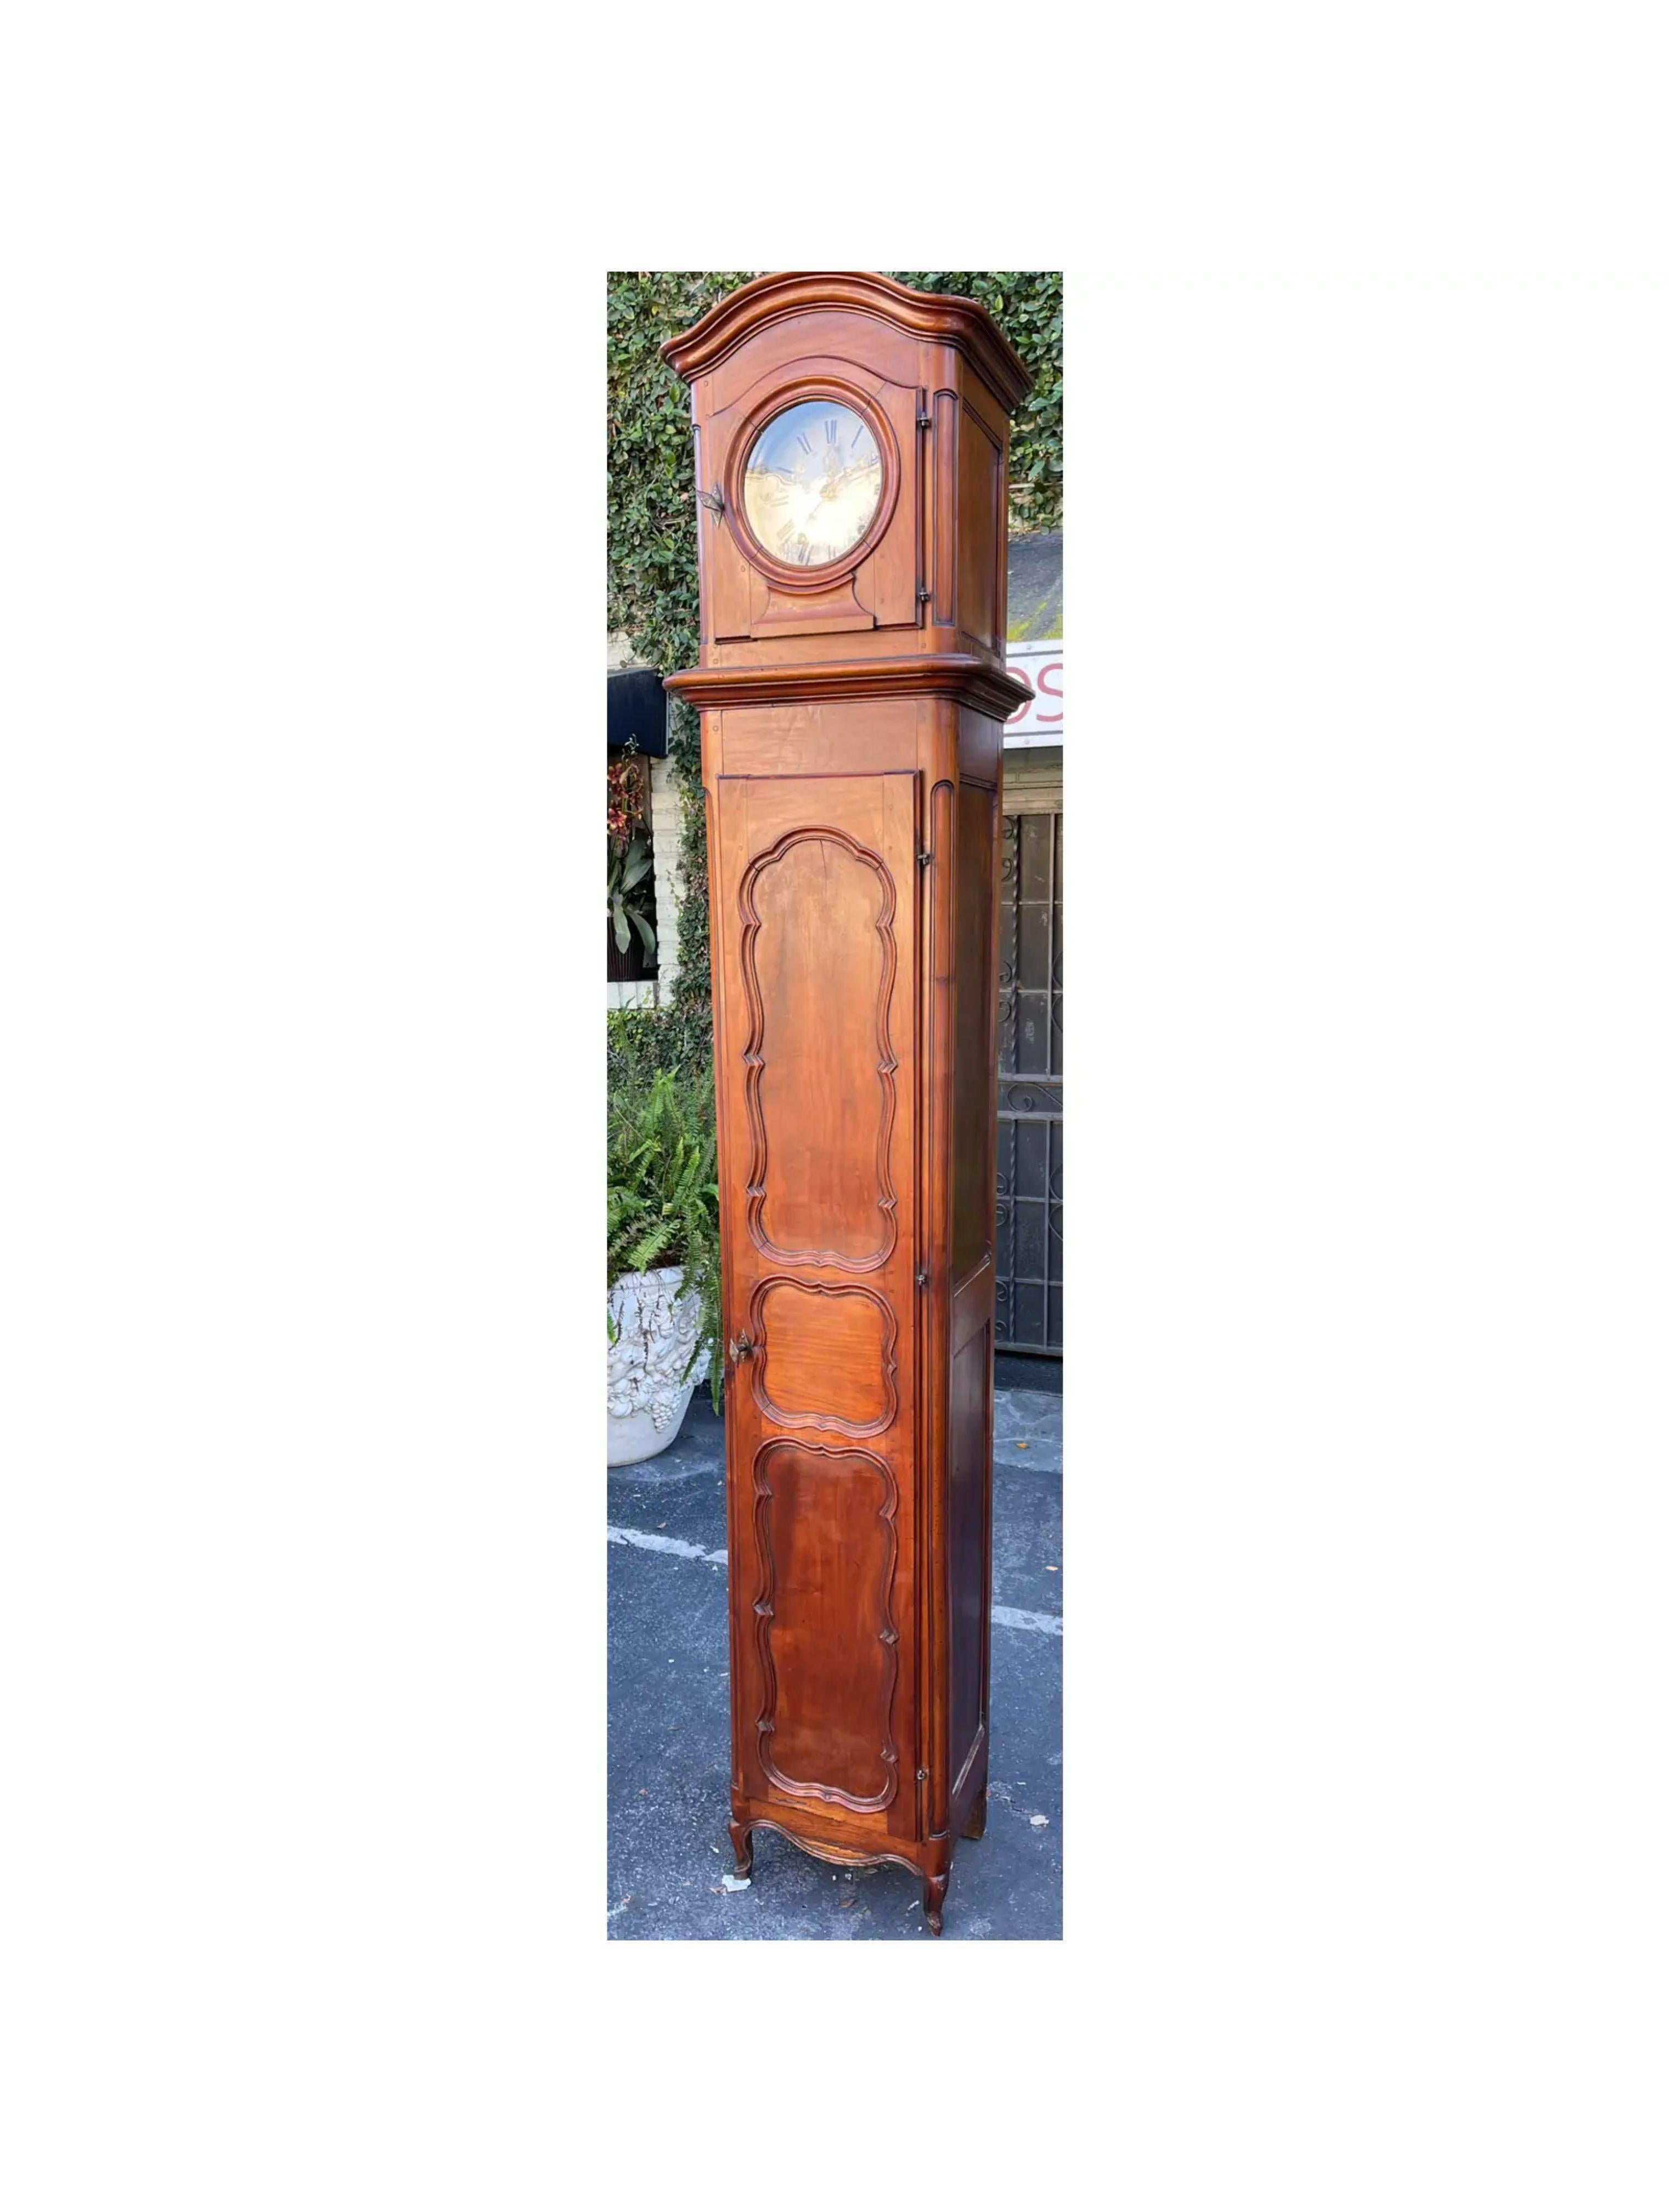 Antique Morbier French Provincial Fruitwood Grandfather Long Case Clock

Additional information: 
Materials: Fruitwood, Mahogany
Please note that this item contains materials that are legally subject to a special export process that may extend